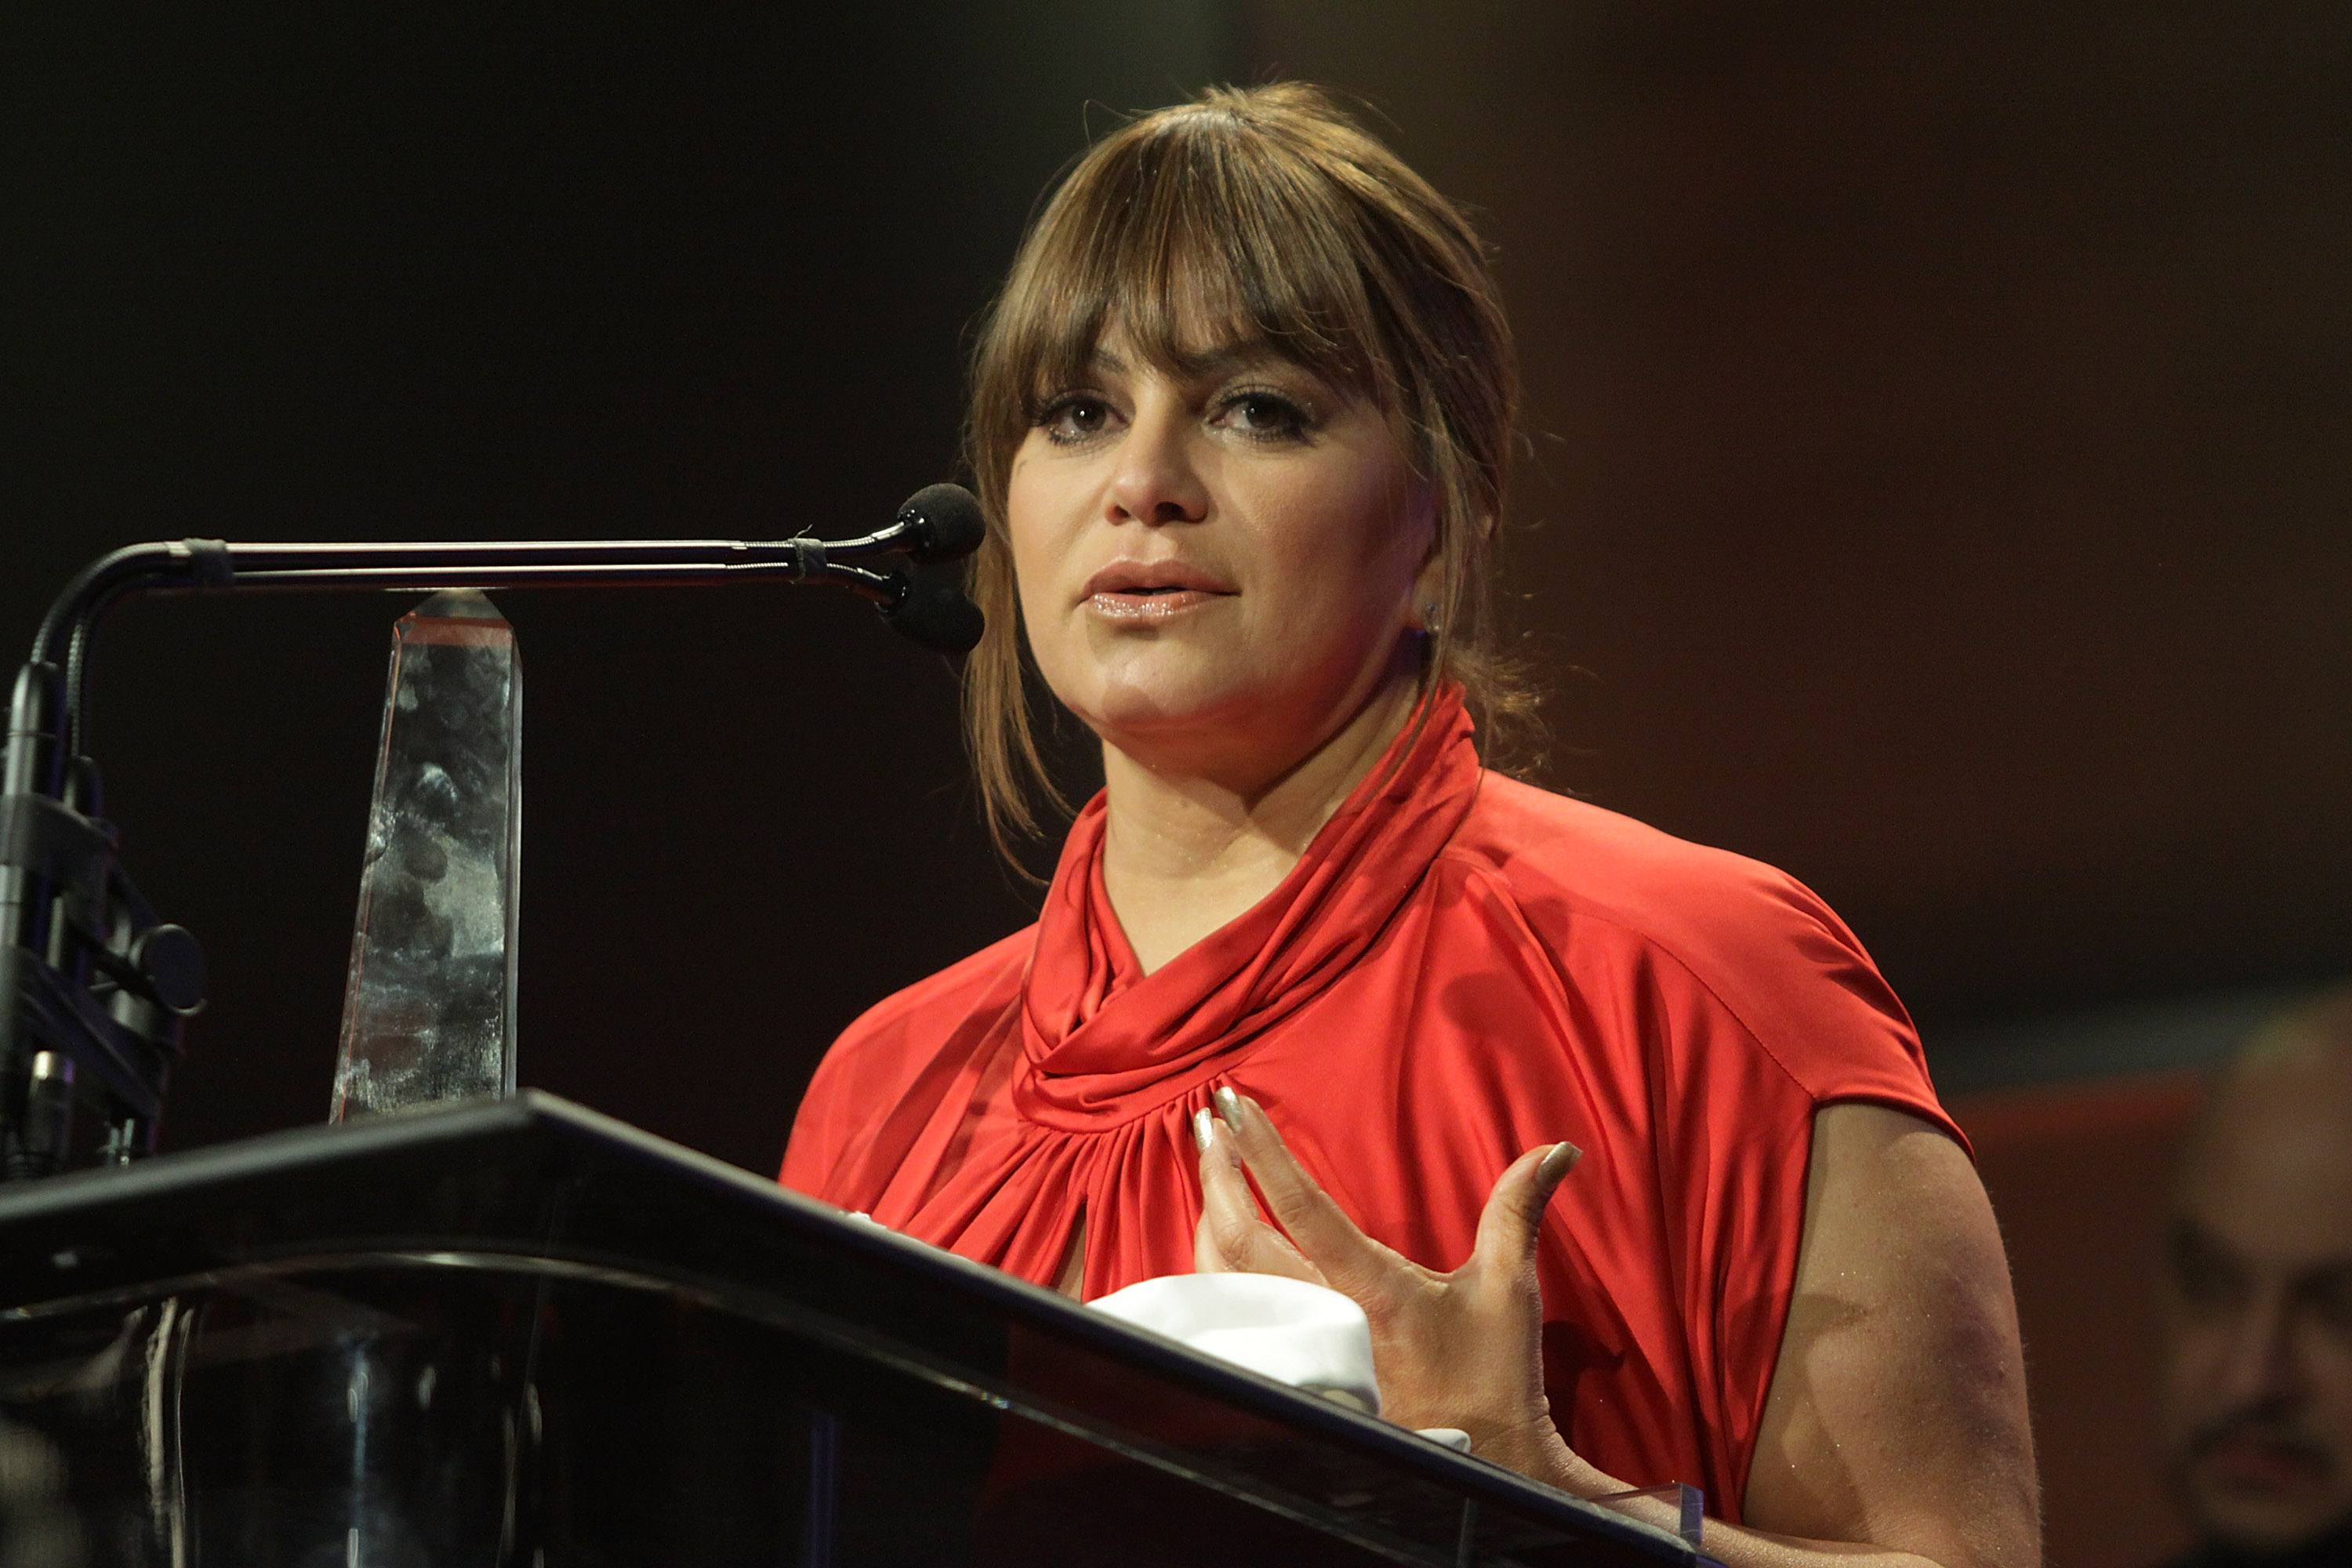 Jenni Rivera speaks during the 27th Annual Imagen Awards at The Beverly Hilton Hotel on August 10, 2012, in Beverly Hills, California. | Source: Getty Images